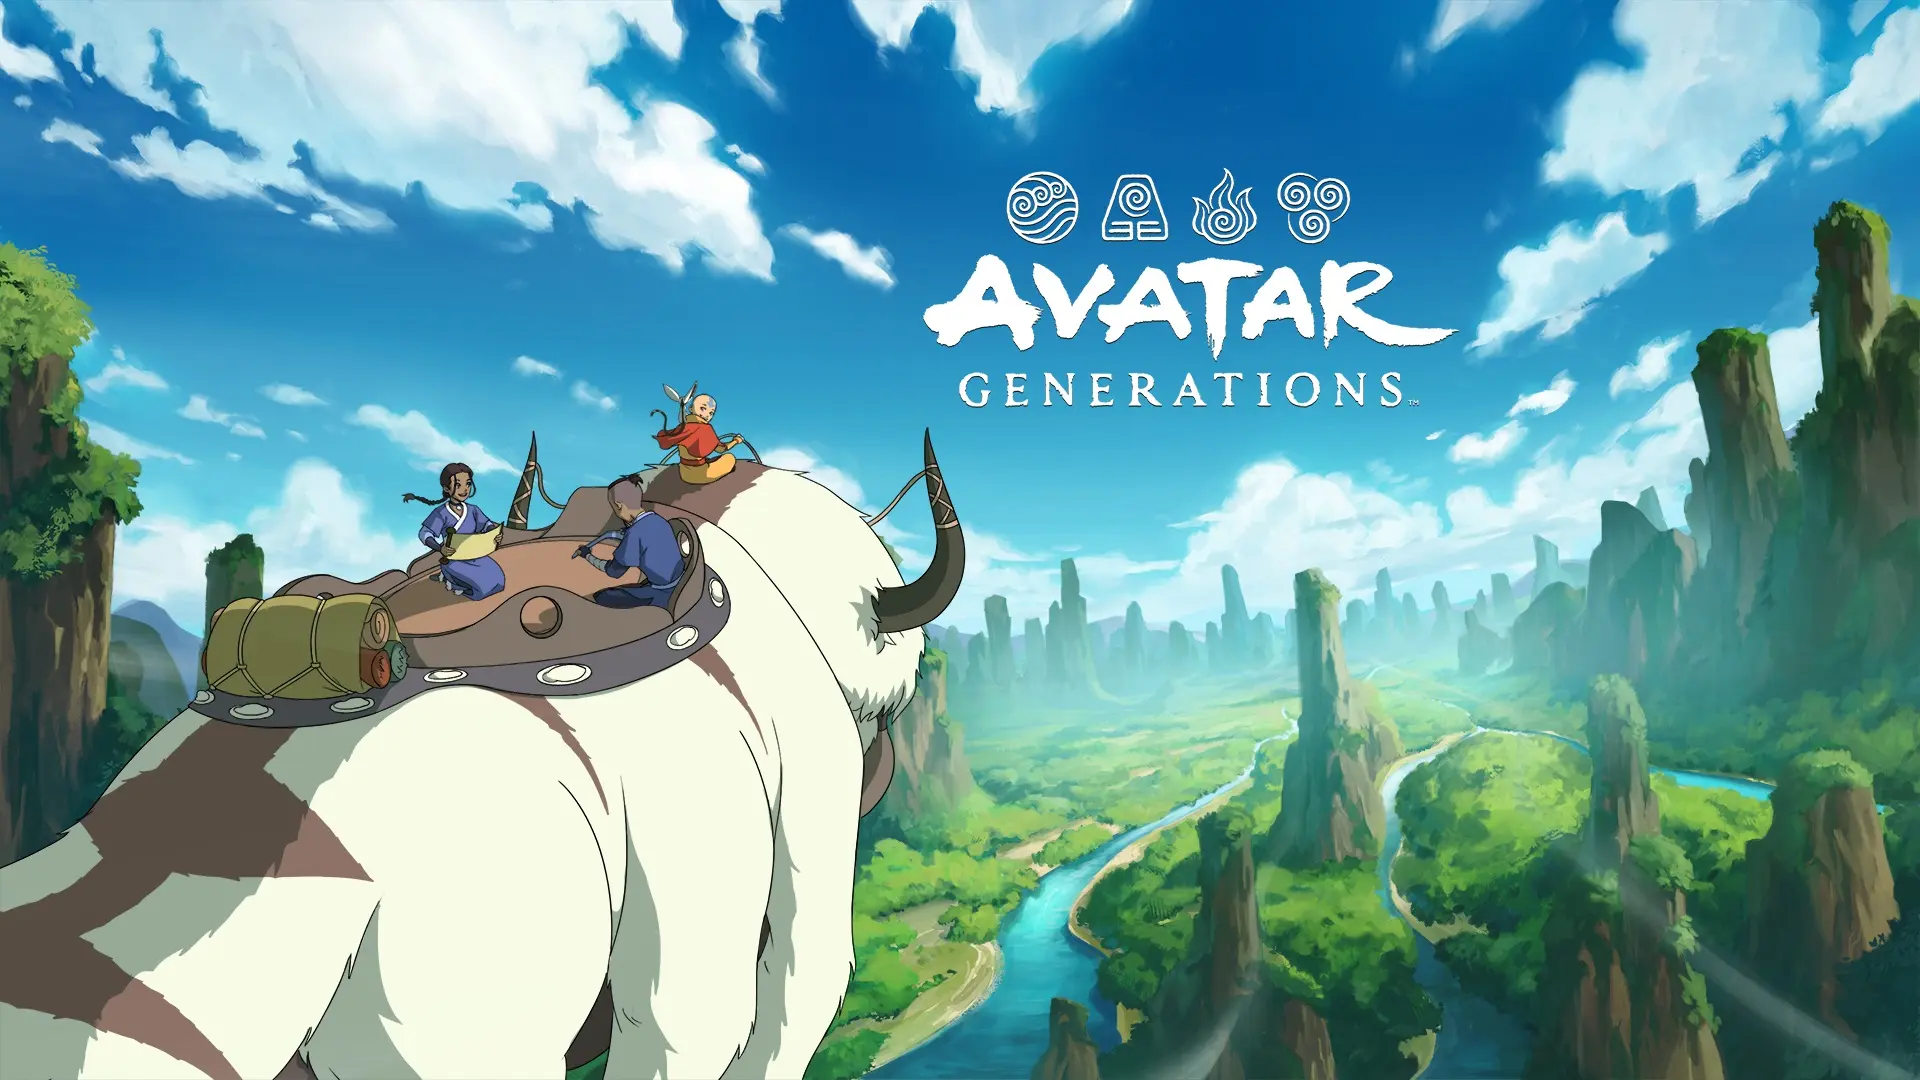 Avatar Video Game Title and Release Date -